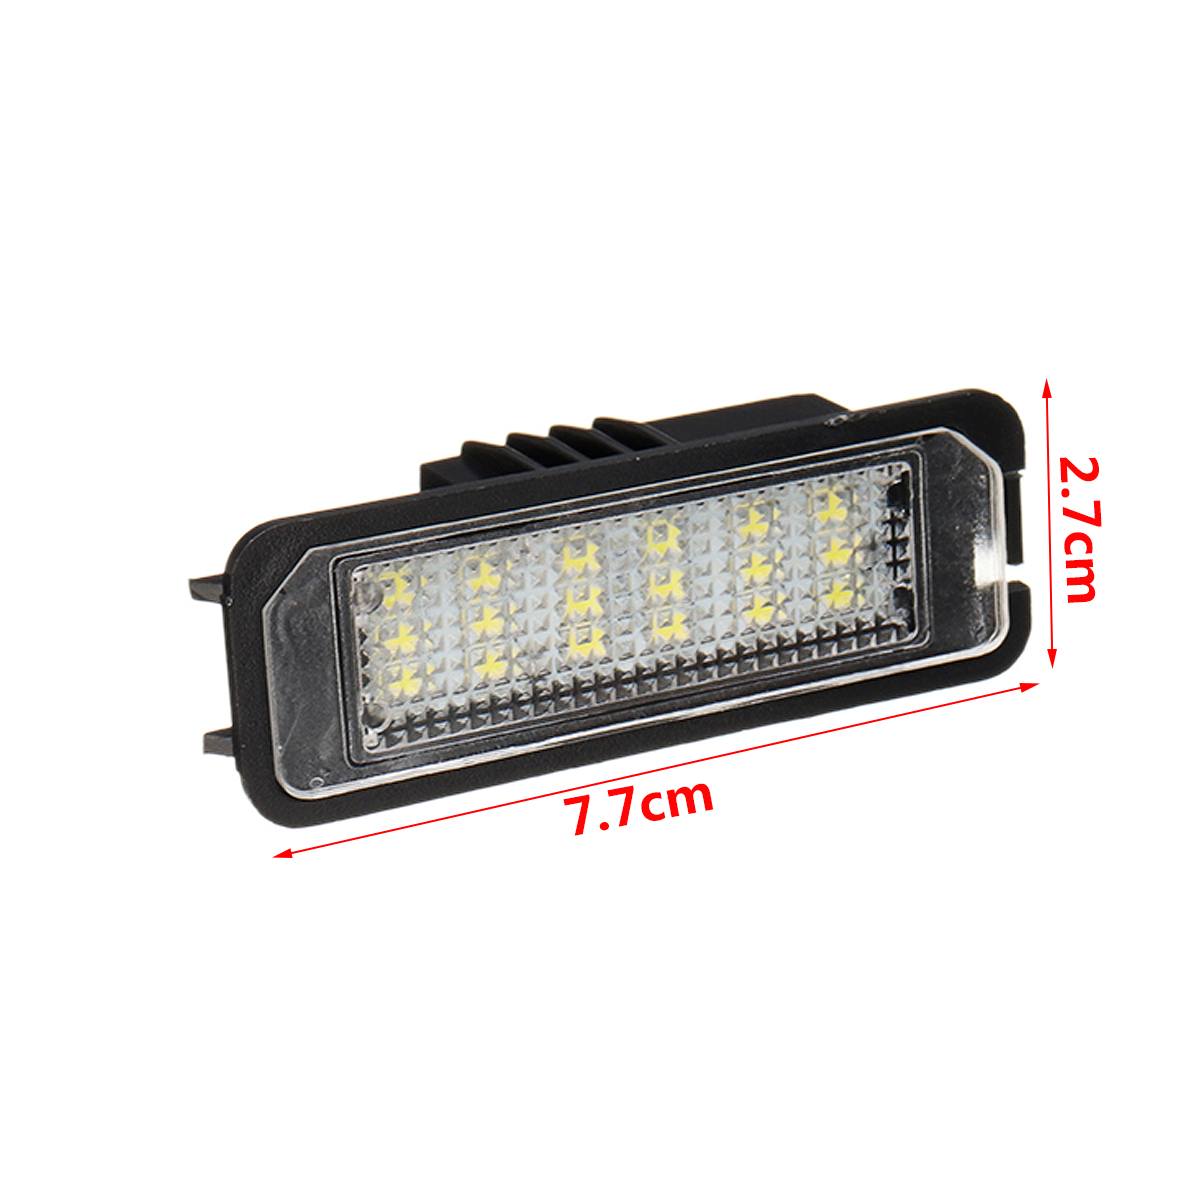 2Pcs 12V 5W LED Number License Plate Light Lamps for VW GOLF 4 6 Polo 9N for Passat Car License Plate Lights Exterior Access